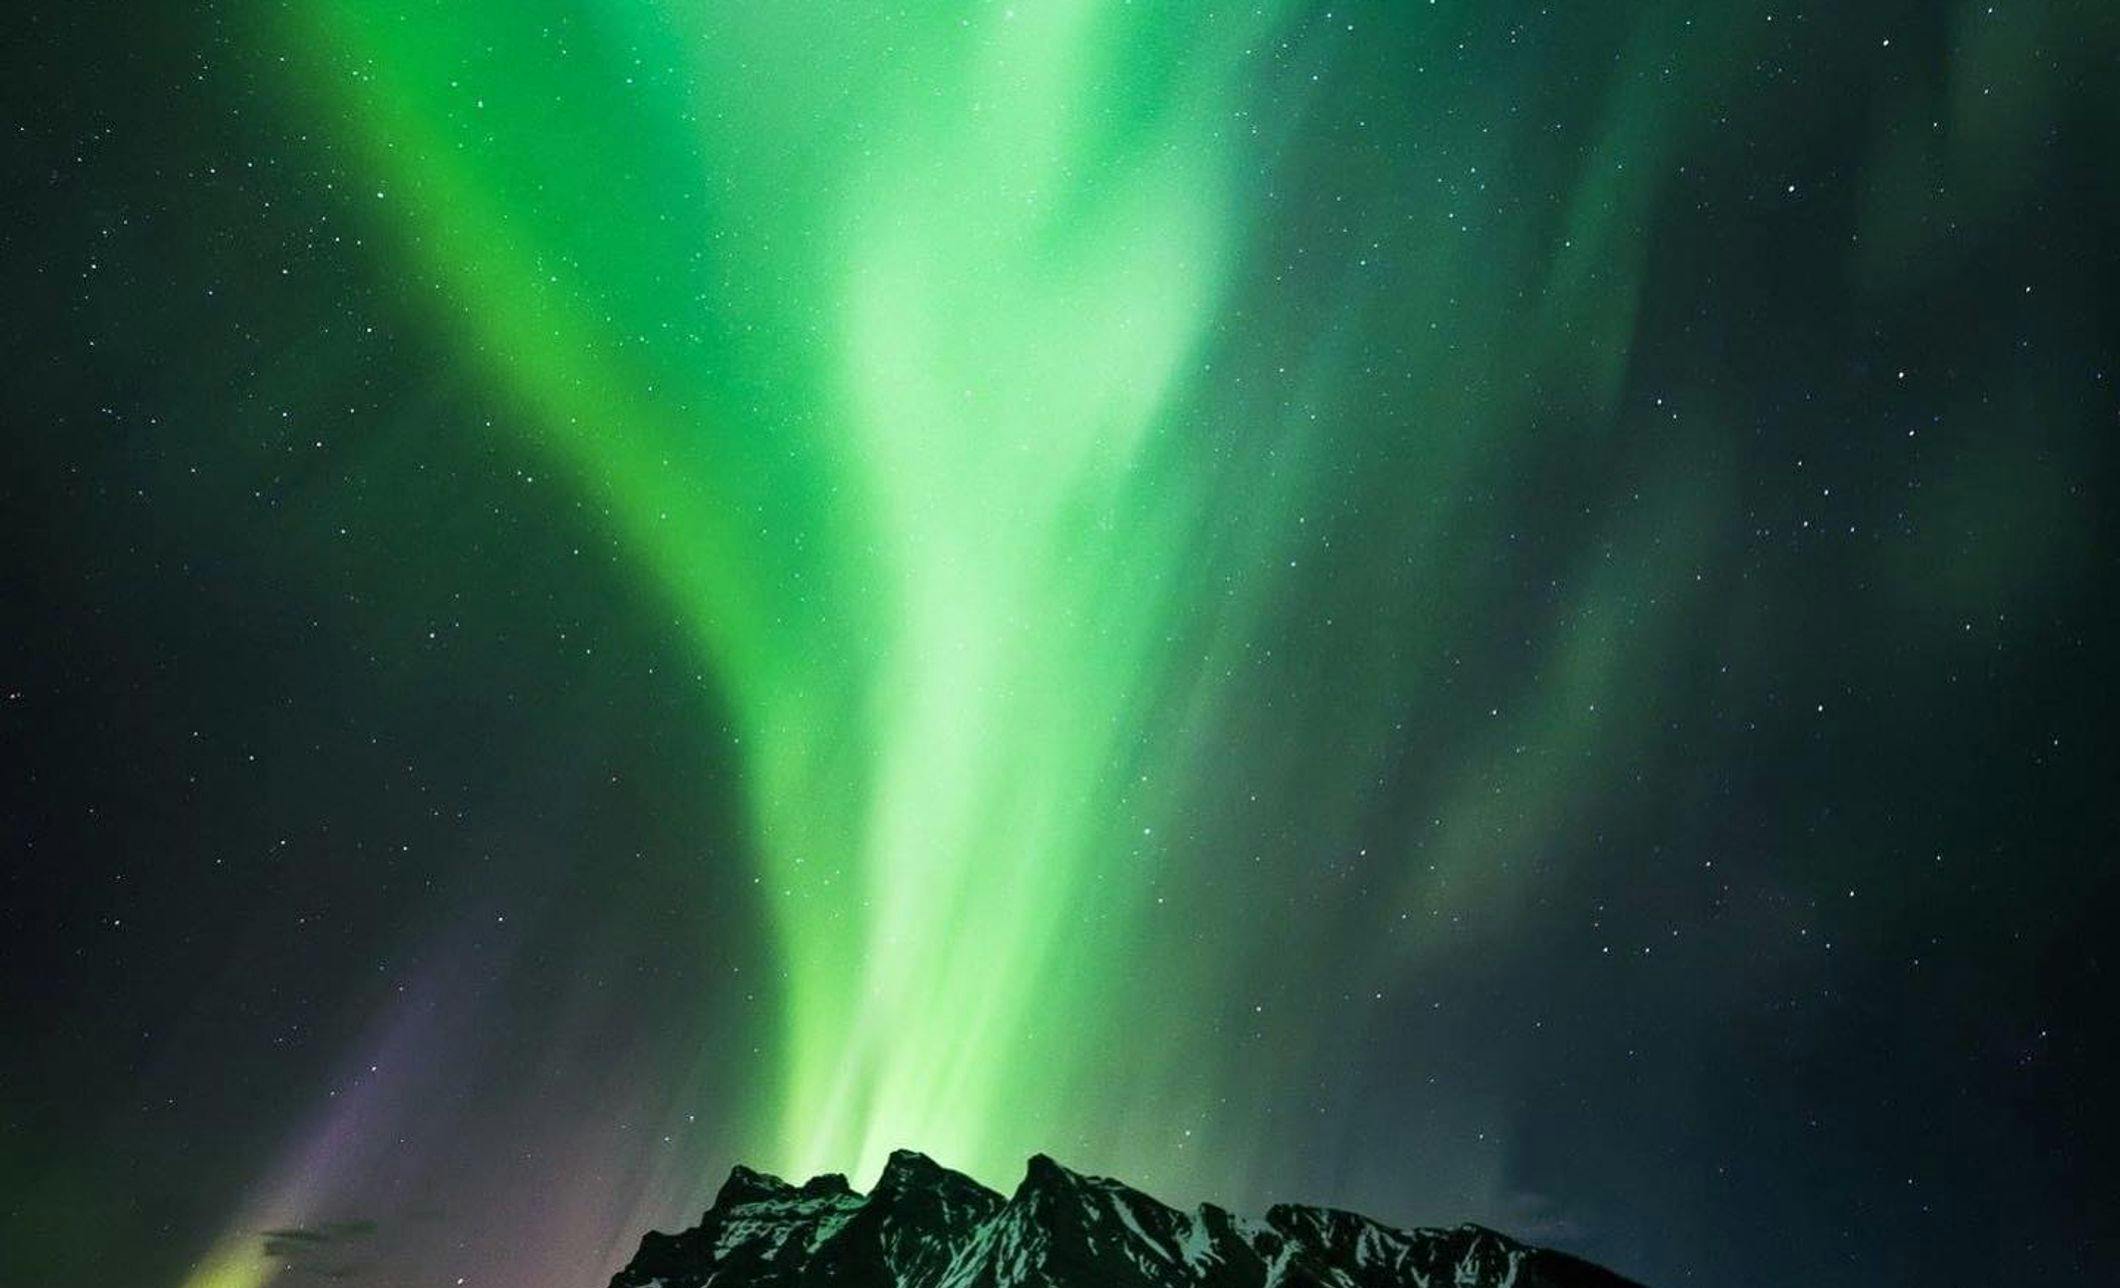 Green northern lights swirl in the sky above a snowcapped mountain overlooking a lake at night